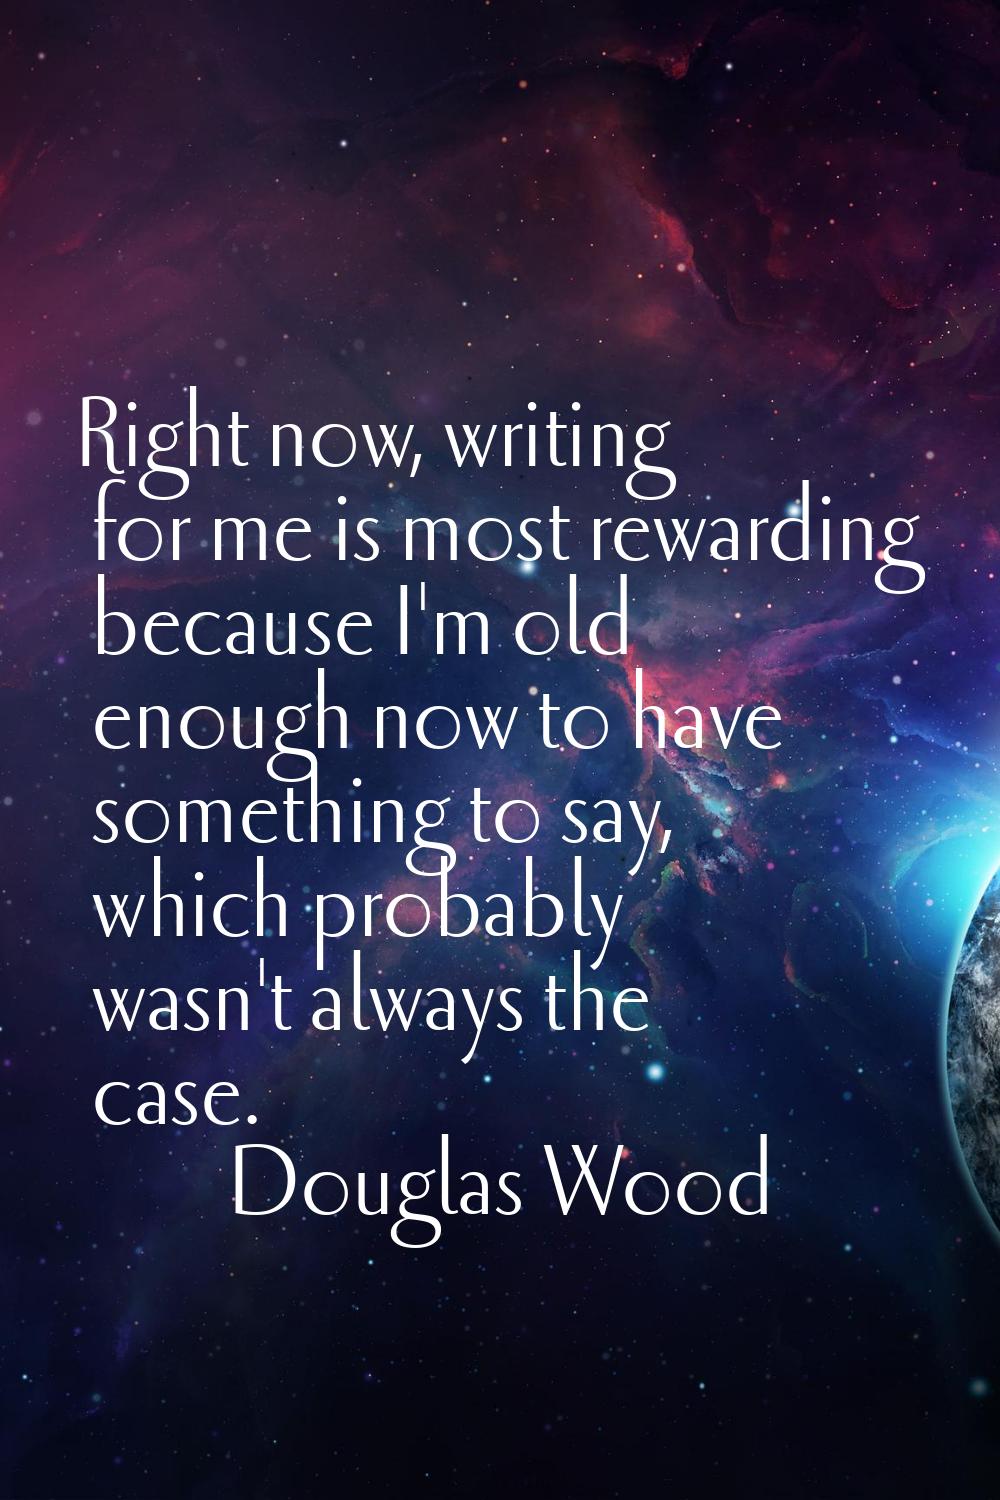 Right now, writing for me is most rewarding because I'm old enough now to have something to say, wh